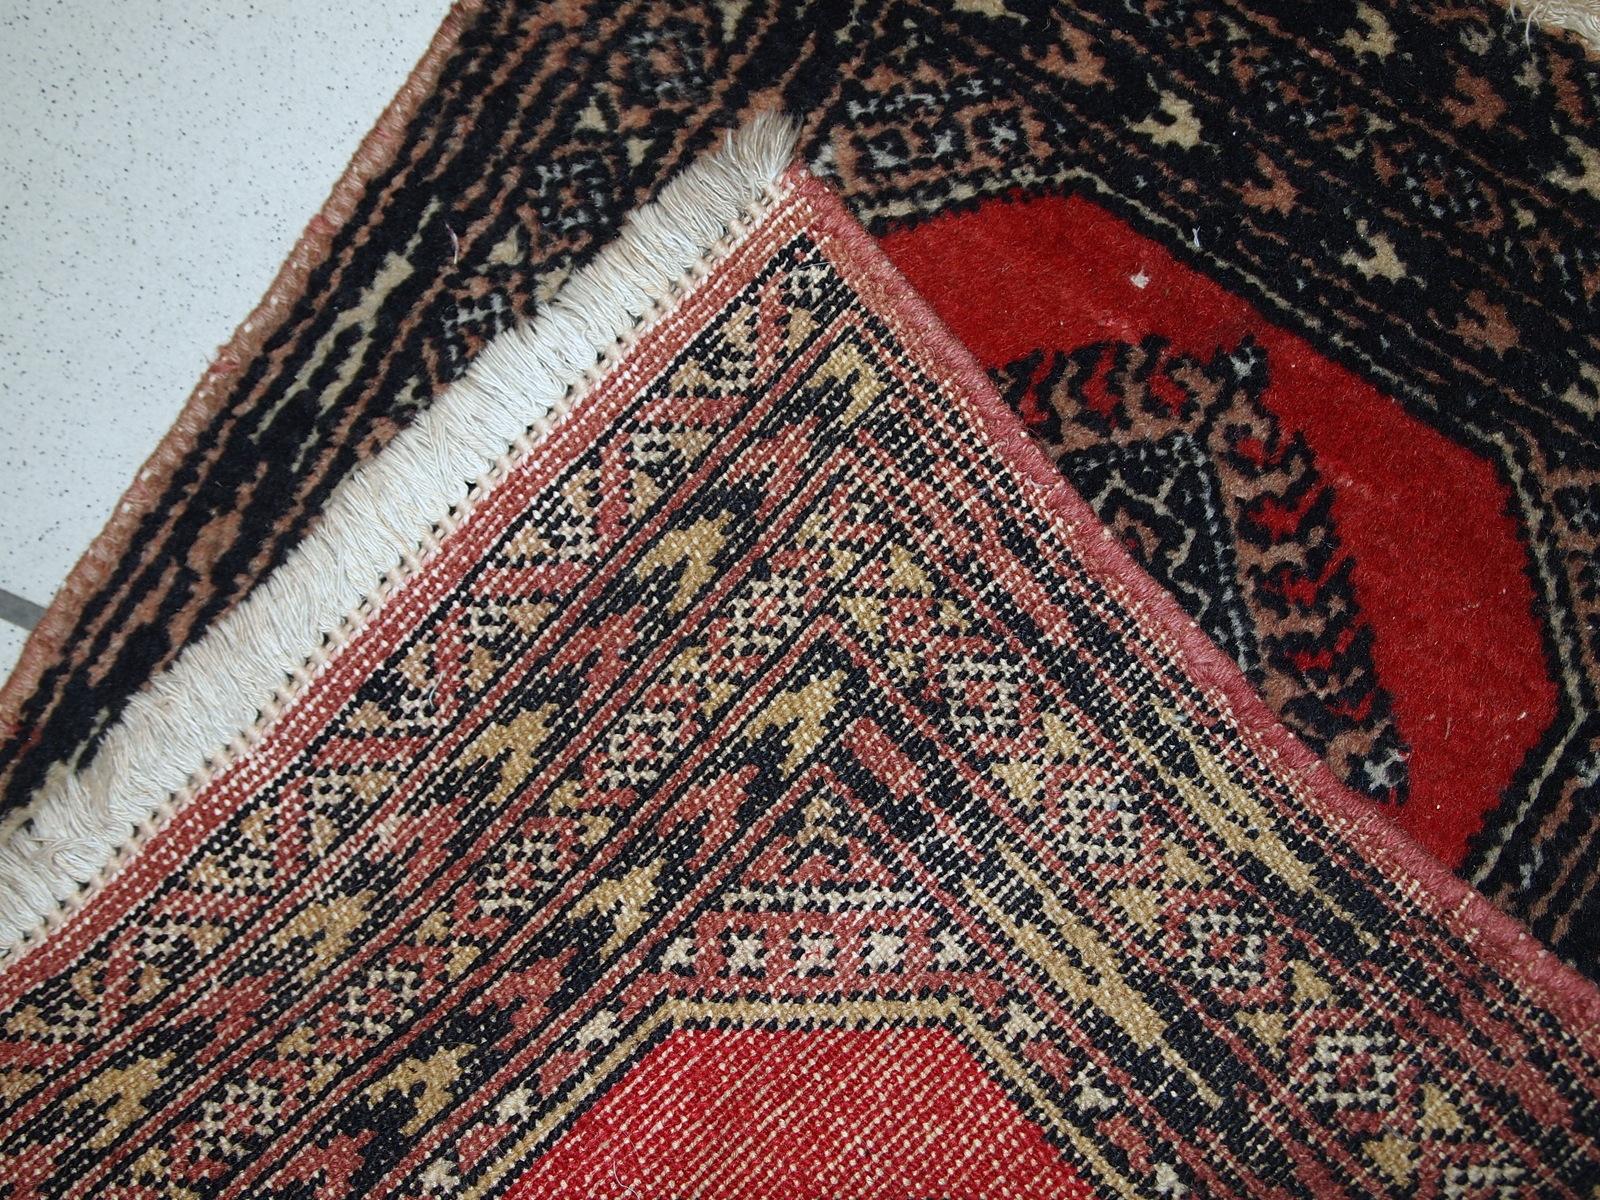 Vintage rug from Pakistan in distressed condition. The rug made in the end of 20th century in red wool.

-condition: distressed,

-circa: 1970s,

-size: 1.4' x 1.9' (45cm x 58cm),

-material: wool,

-country of origin: Pakistan,

-style: